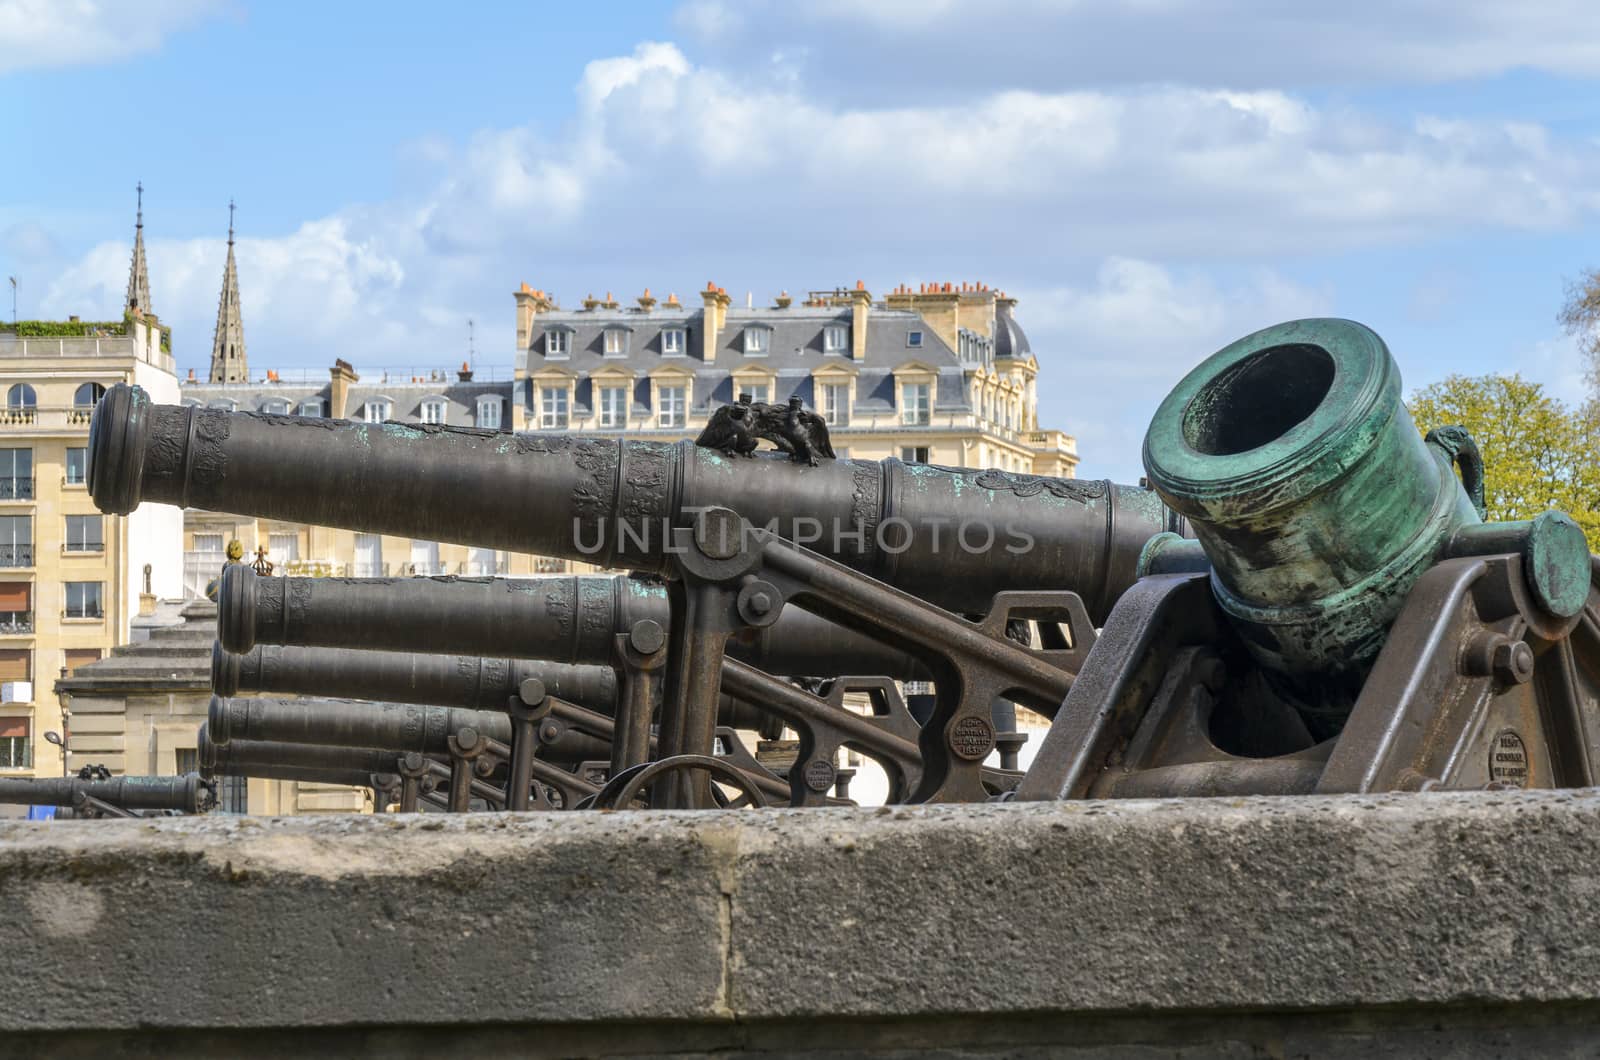 Cannons at Les Invalides in Paris, France by Valegorov